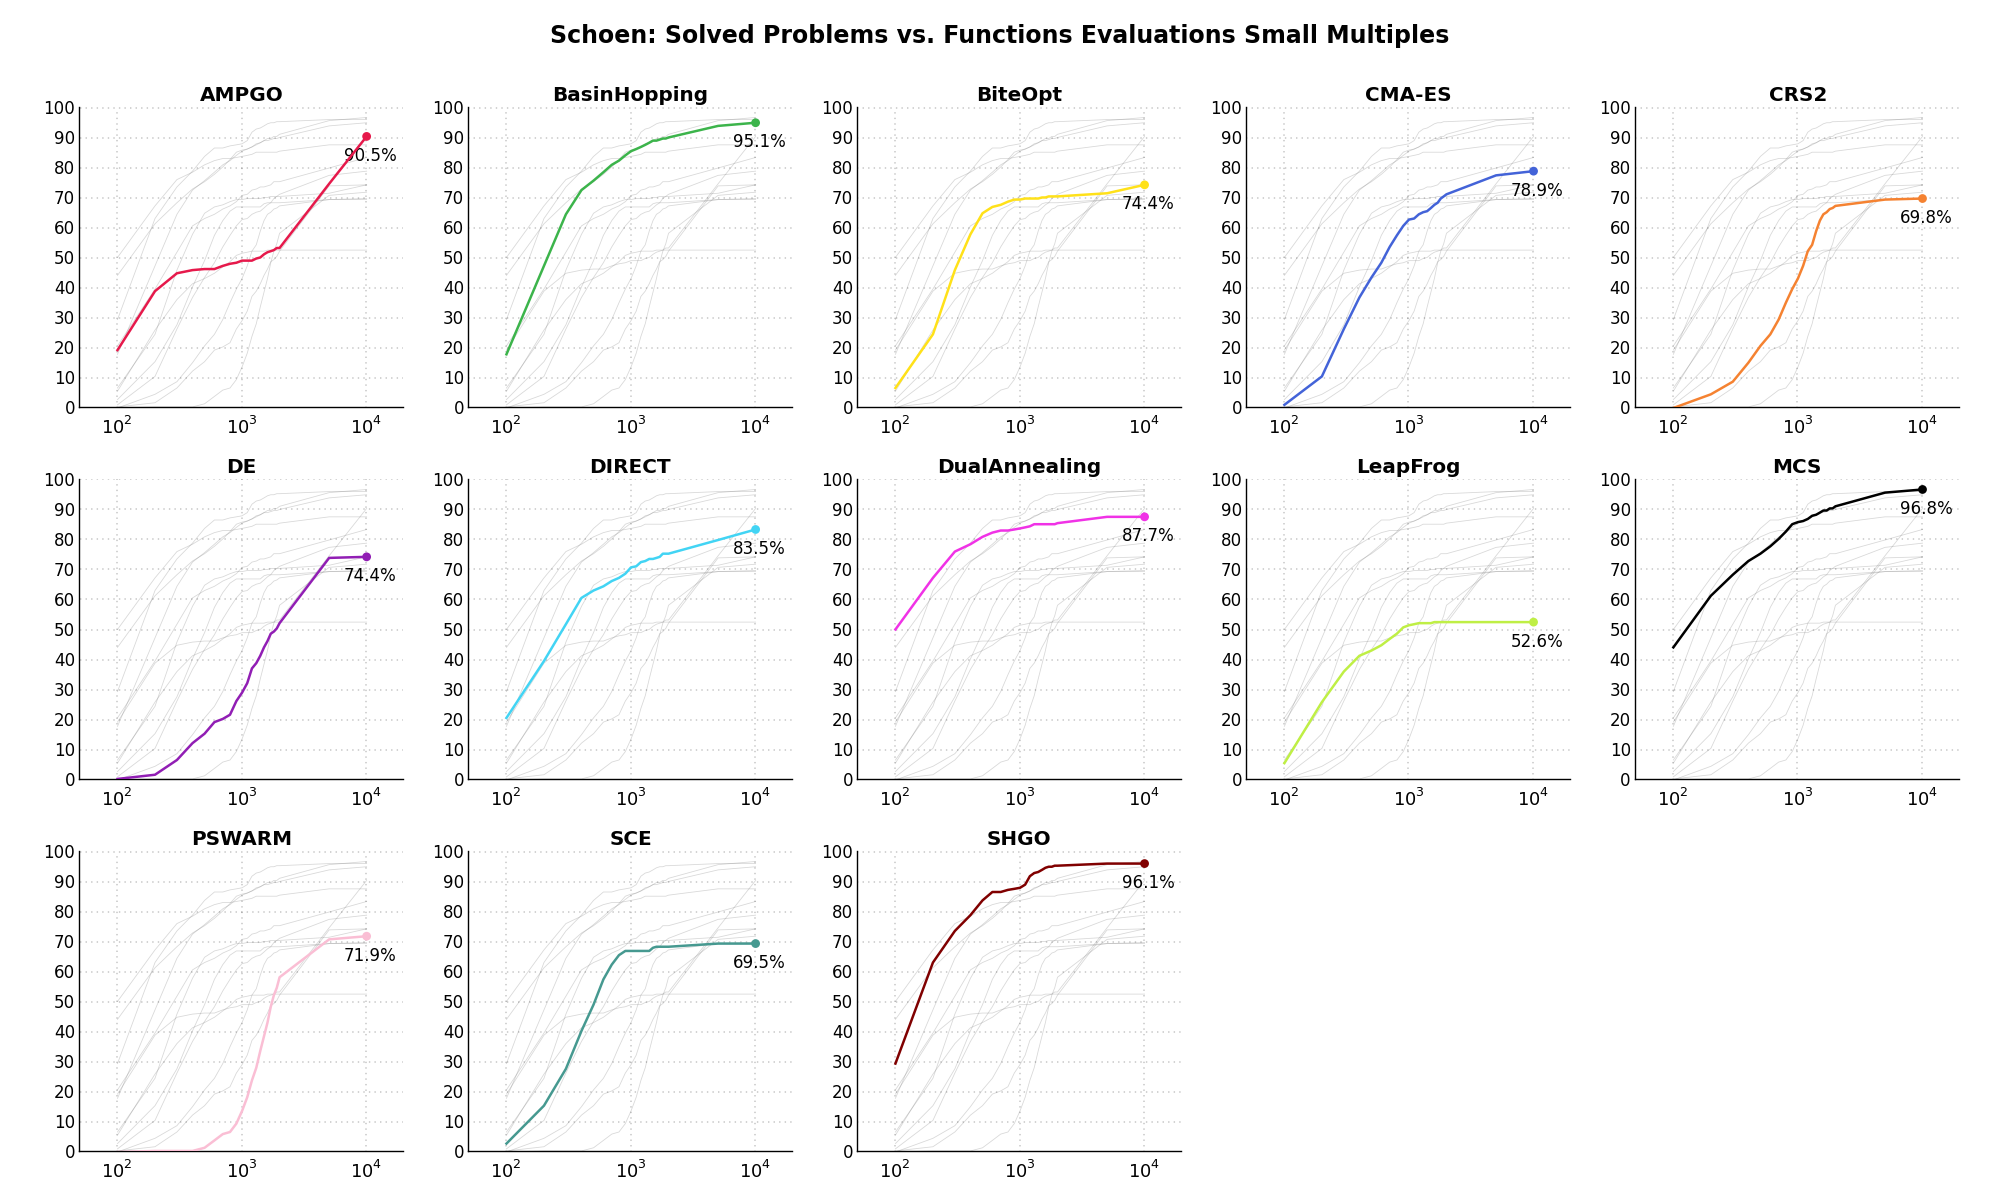 Percentage of problems solved given a fixed number of function evaluations on the Schoen test suite